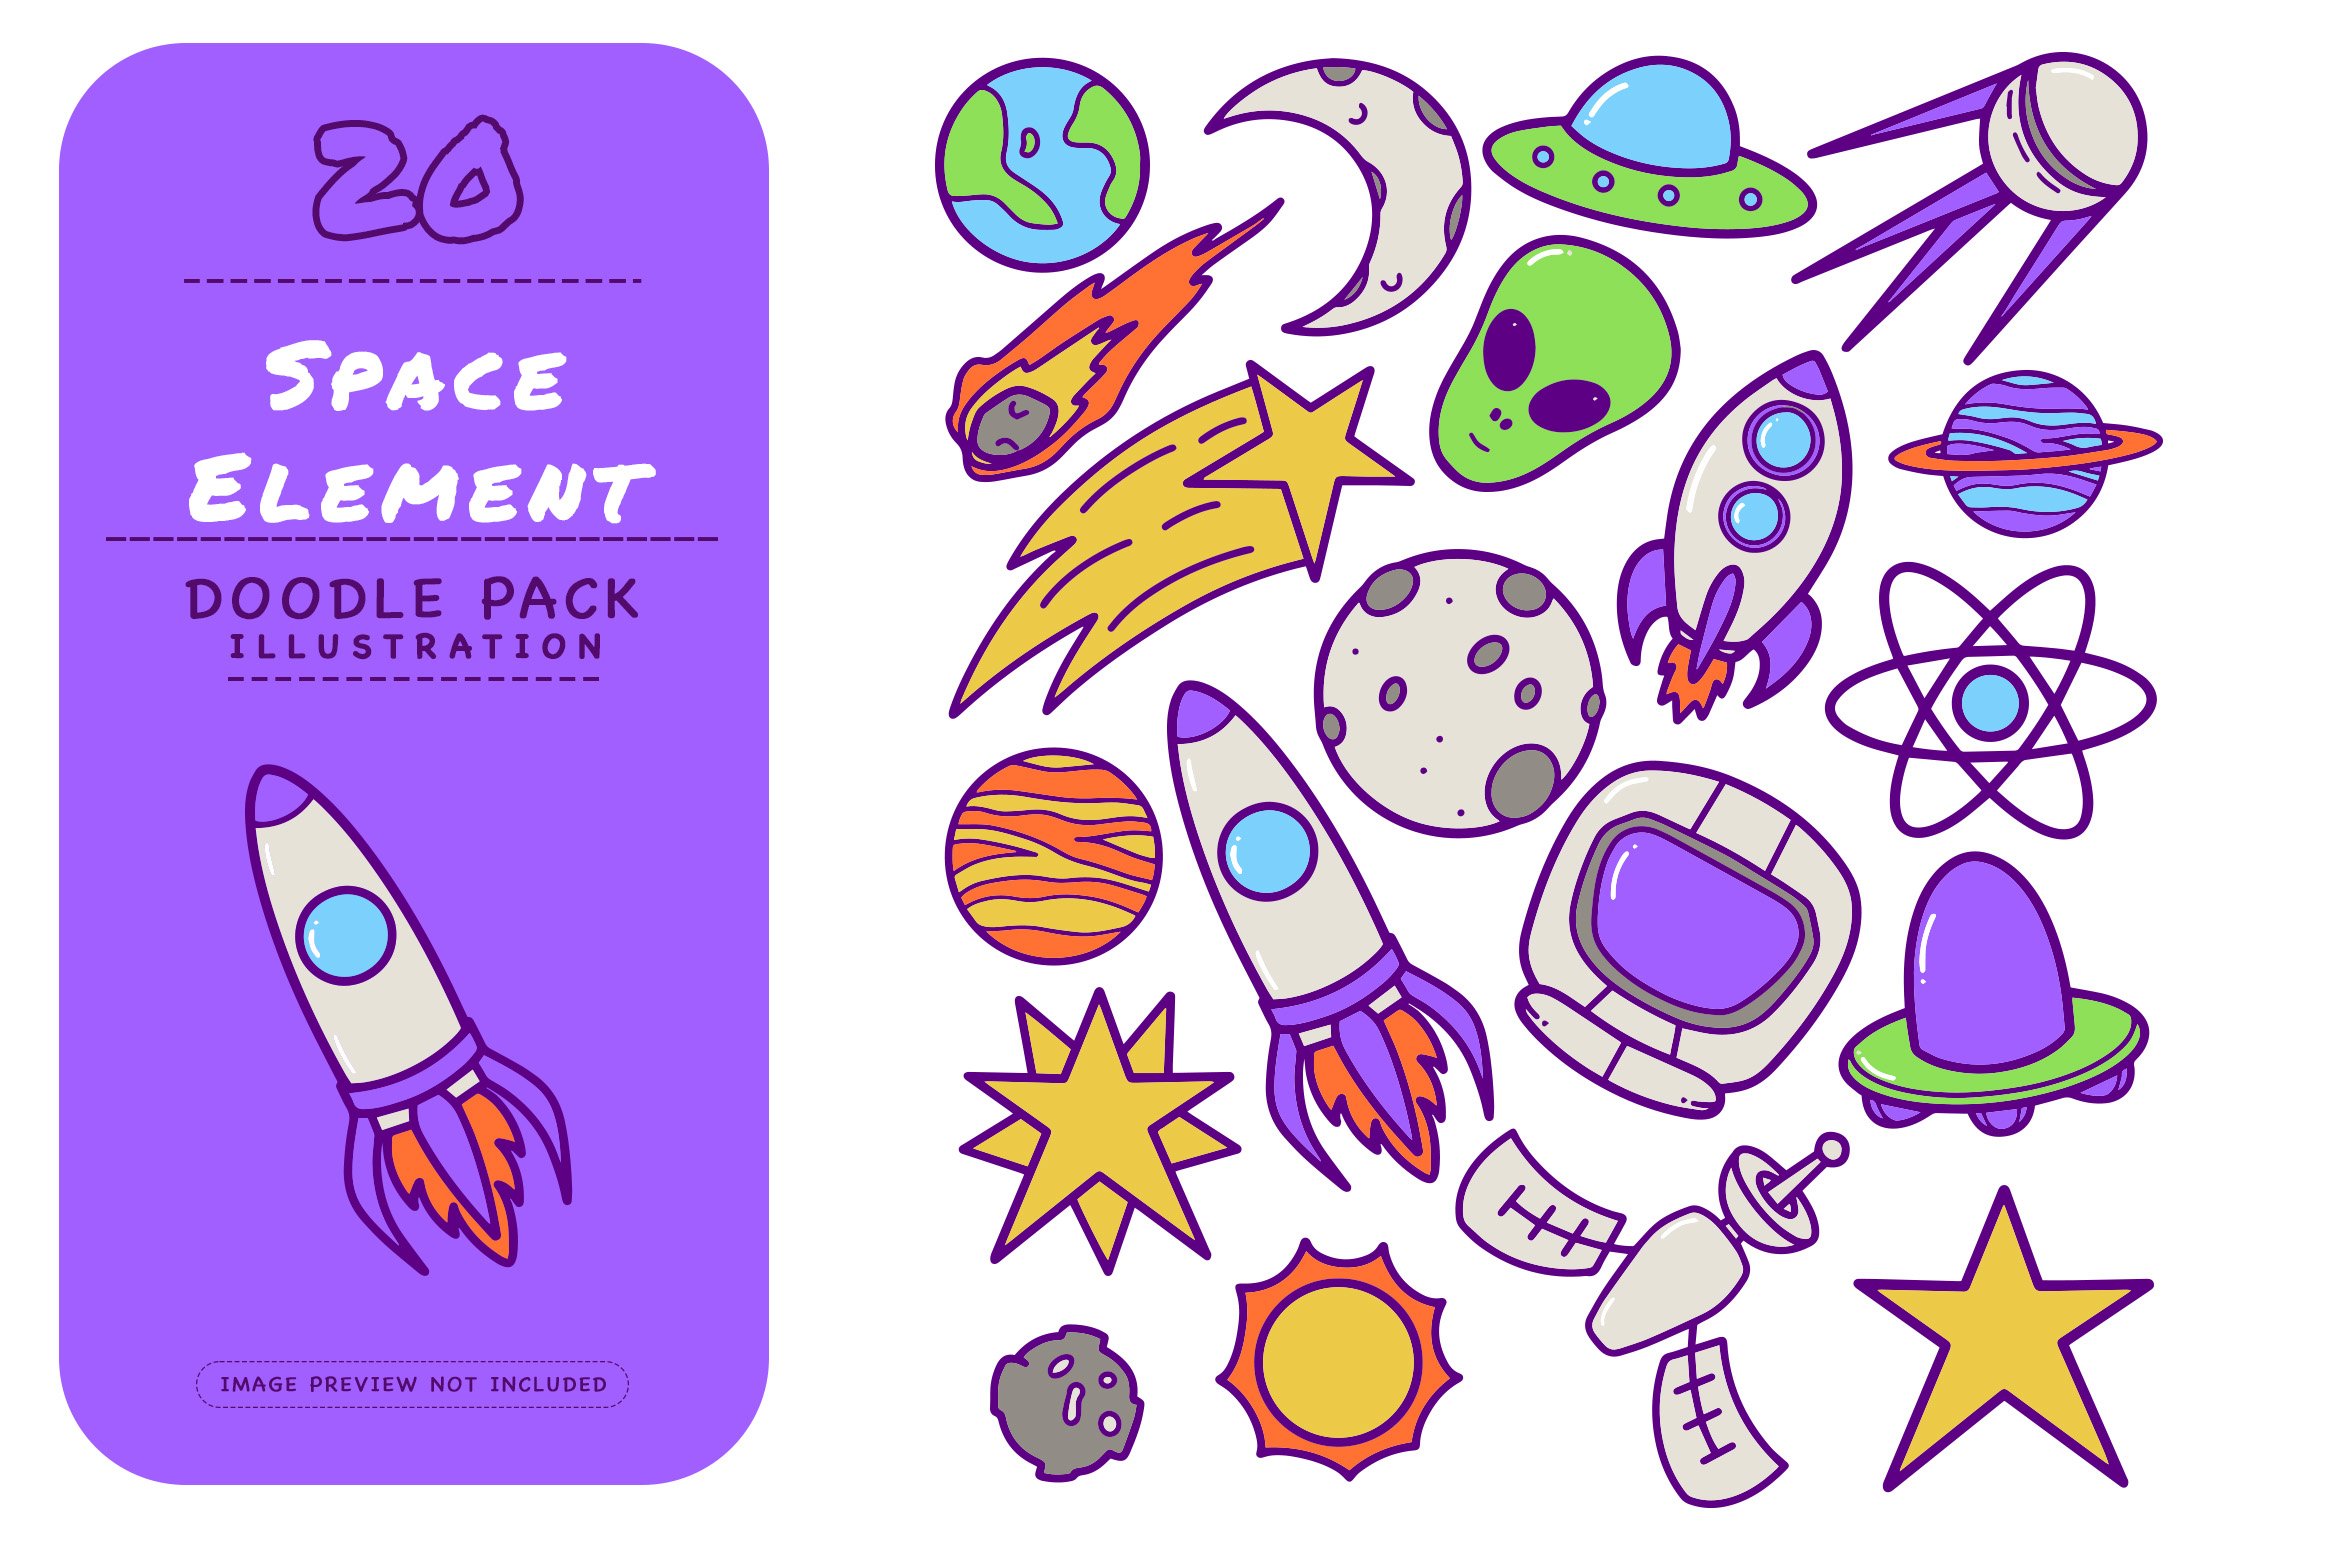 Space Element - Doodle Pack cover image.